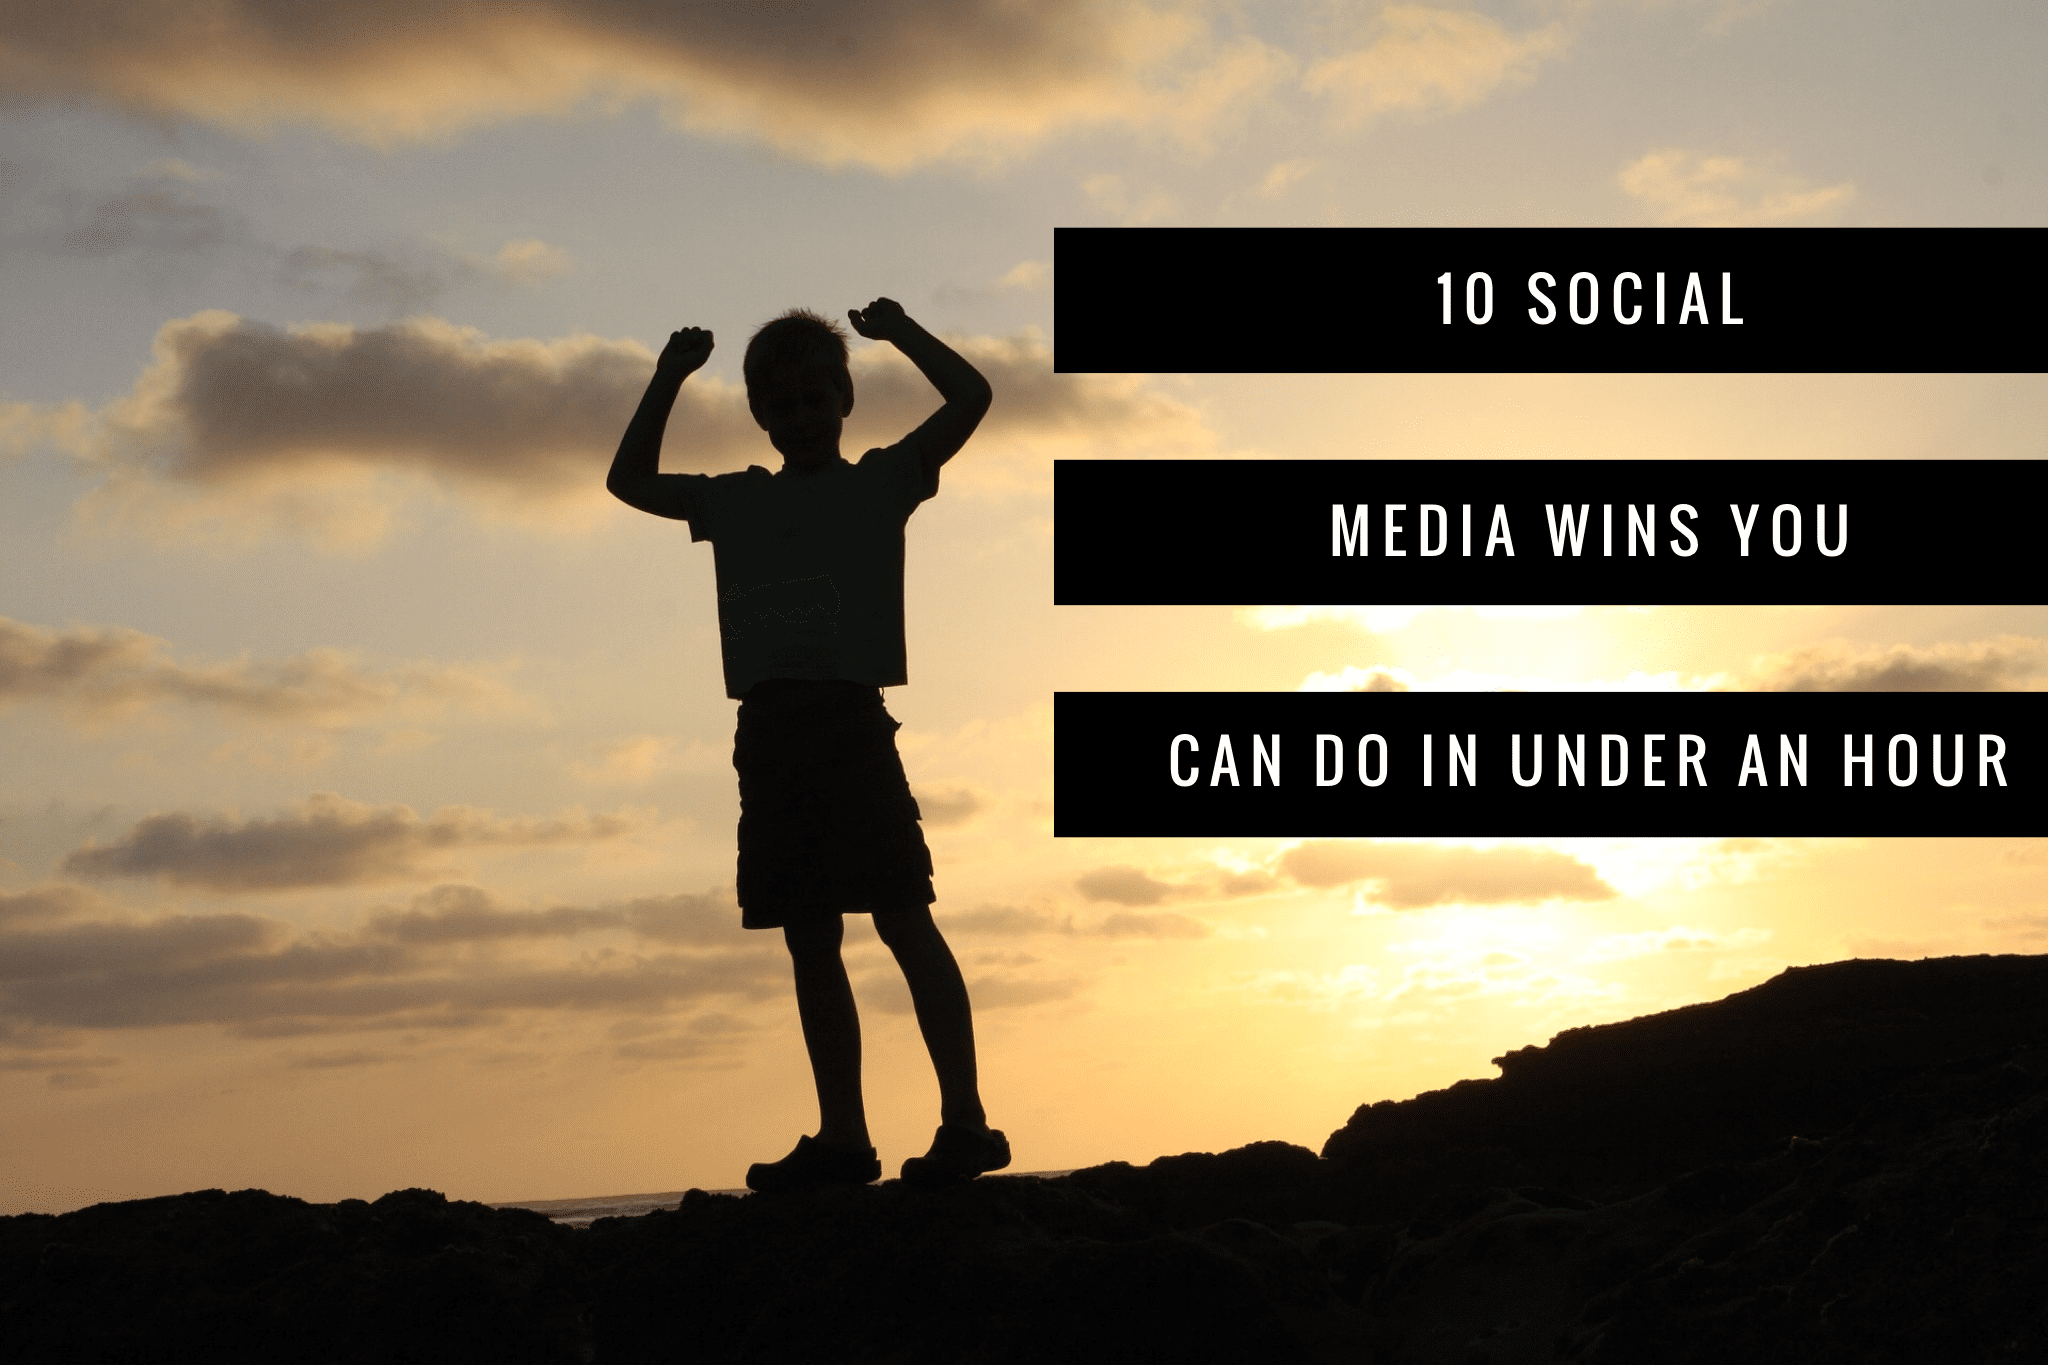 10 Social Media Wins You Can Do In Under An Hour